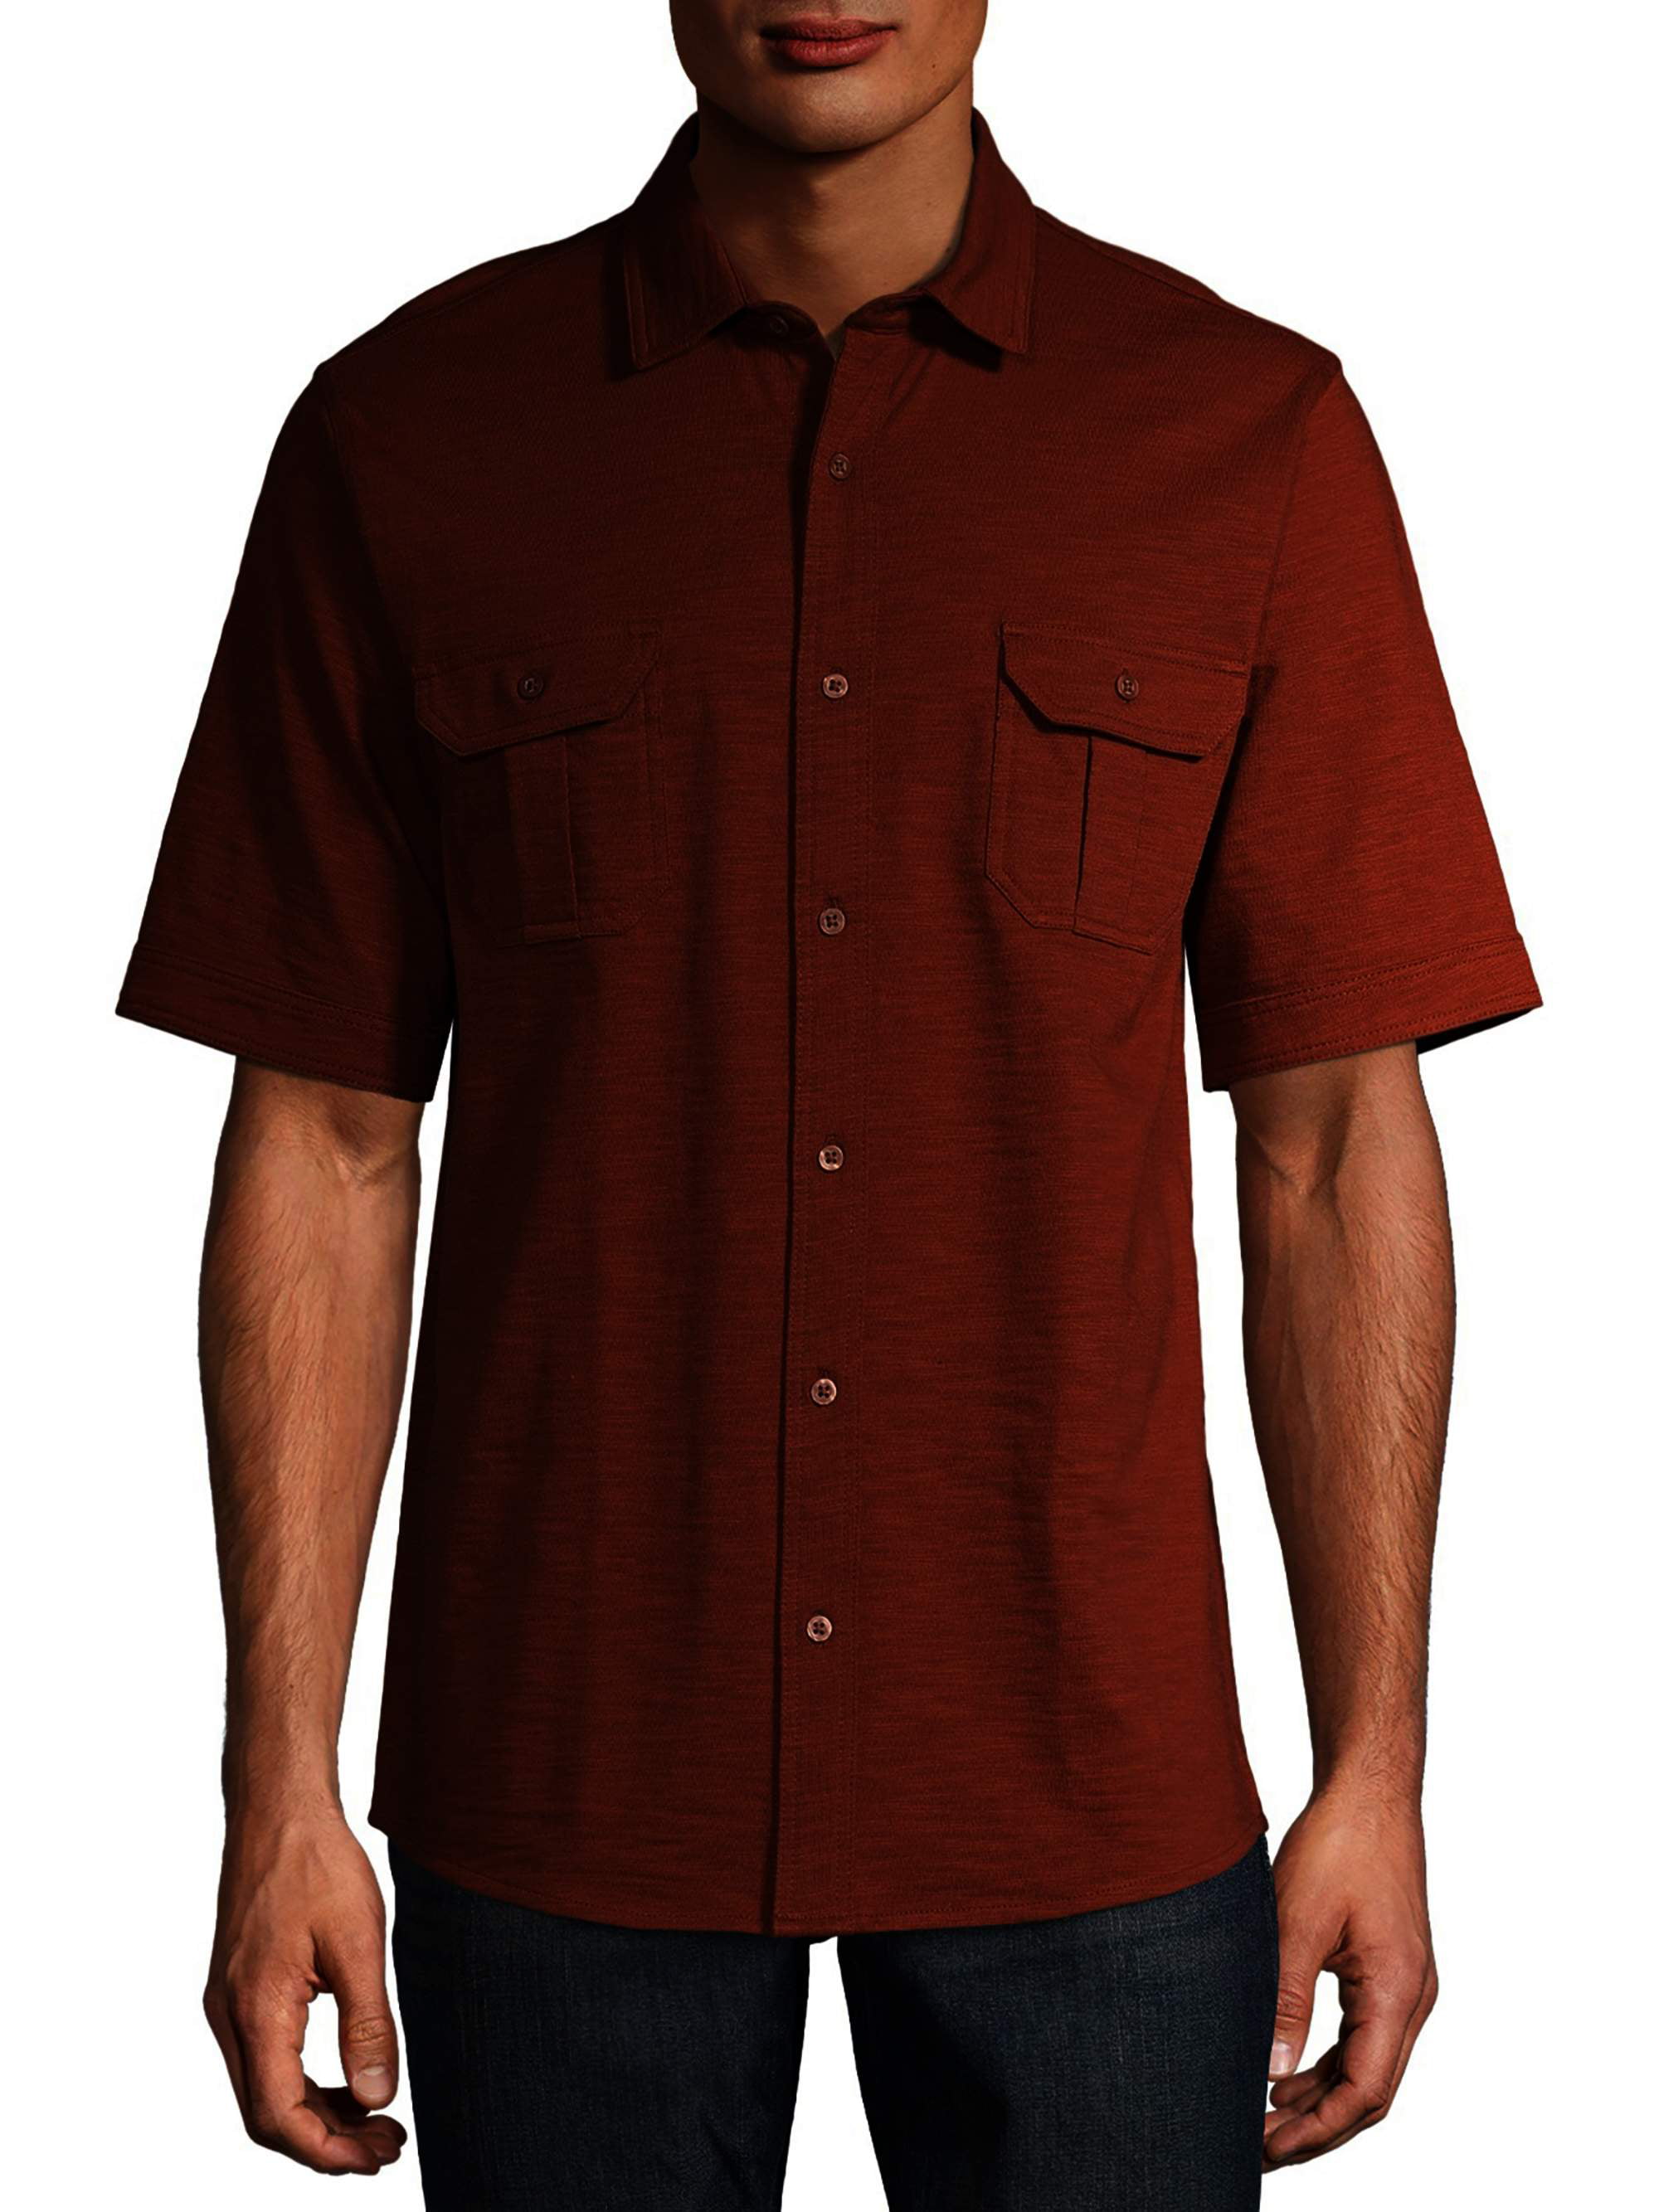 George Men's and Big Men's Ultra Soft Knit Short Sleeve Button-down